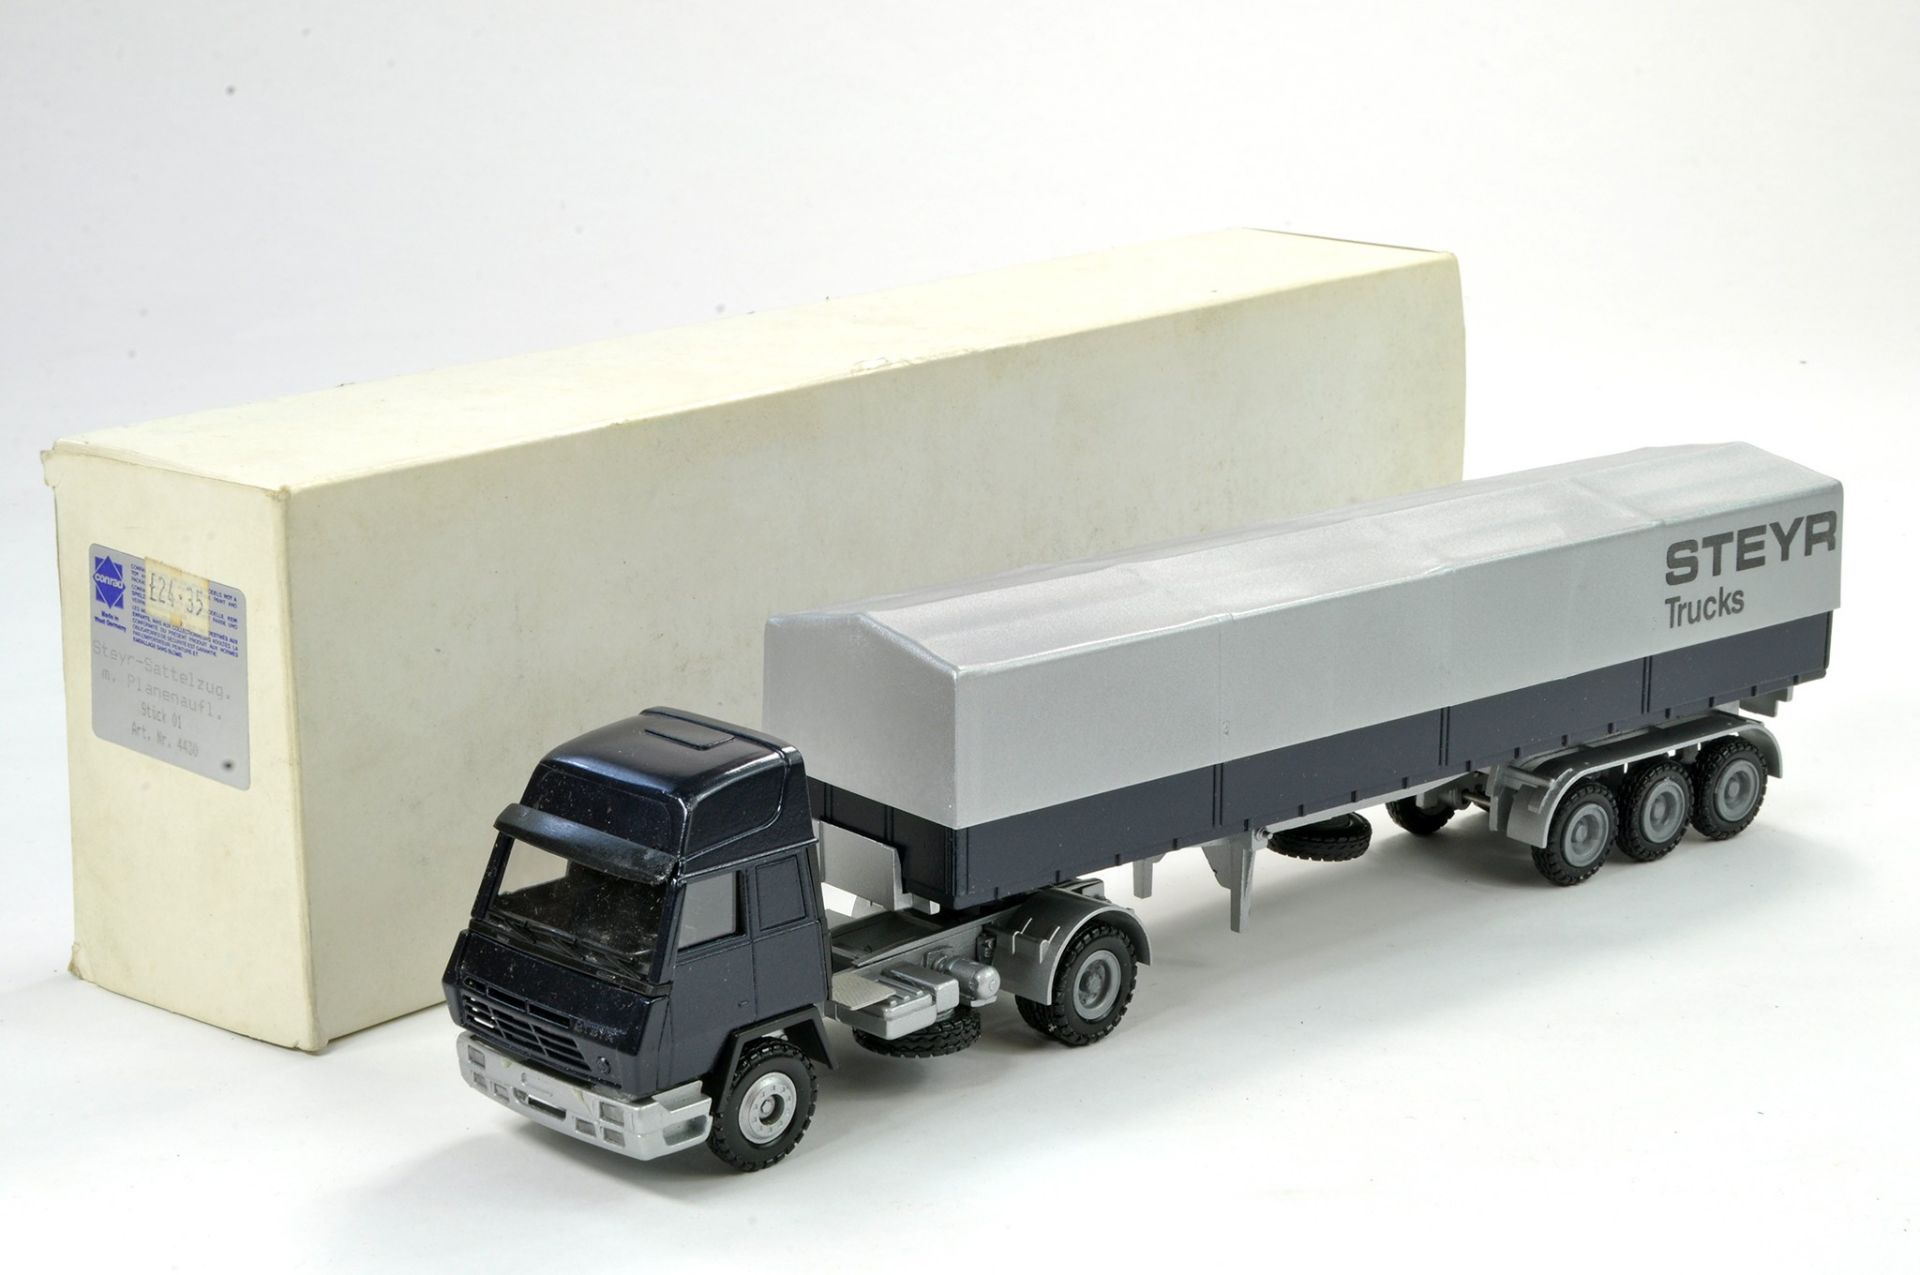 Conrad Diecast Truck Issue comprising No. 4430 Steyr in livery of Sattelzug. Appears generally